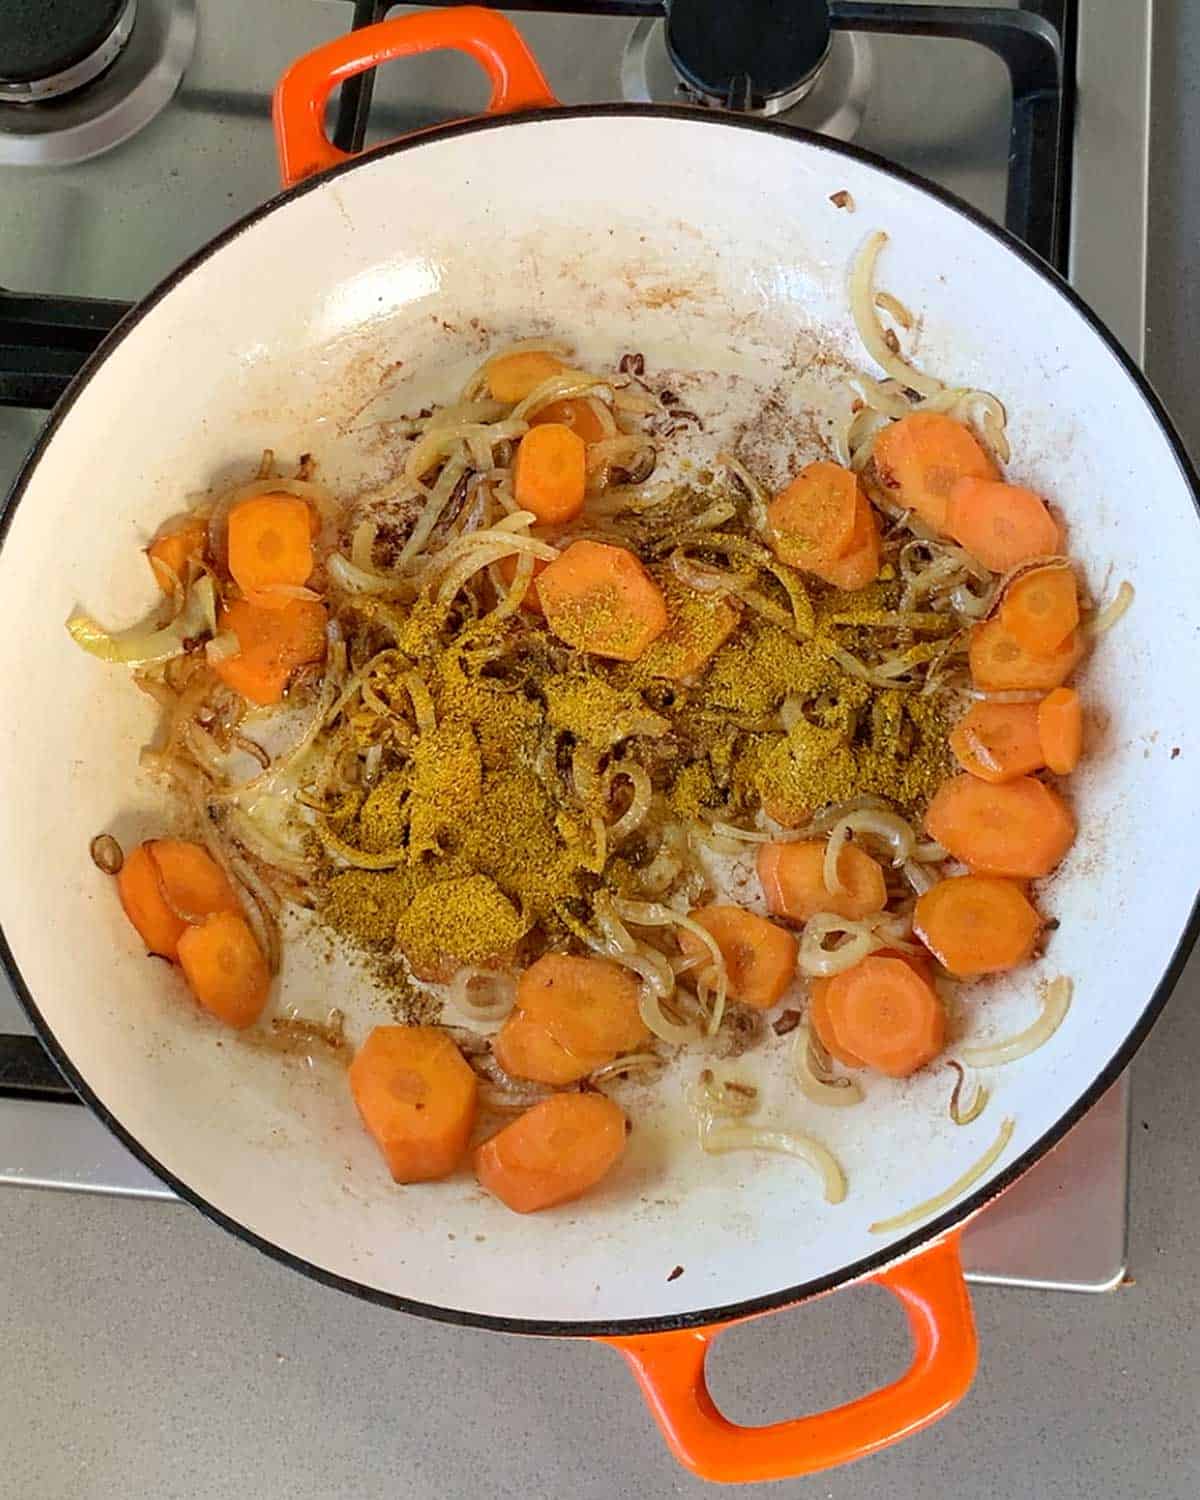 Onions, carrots and curry powder cooking in a cast iron dish.